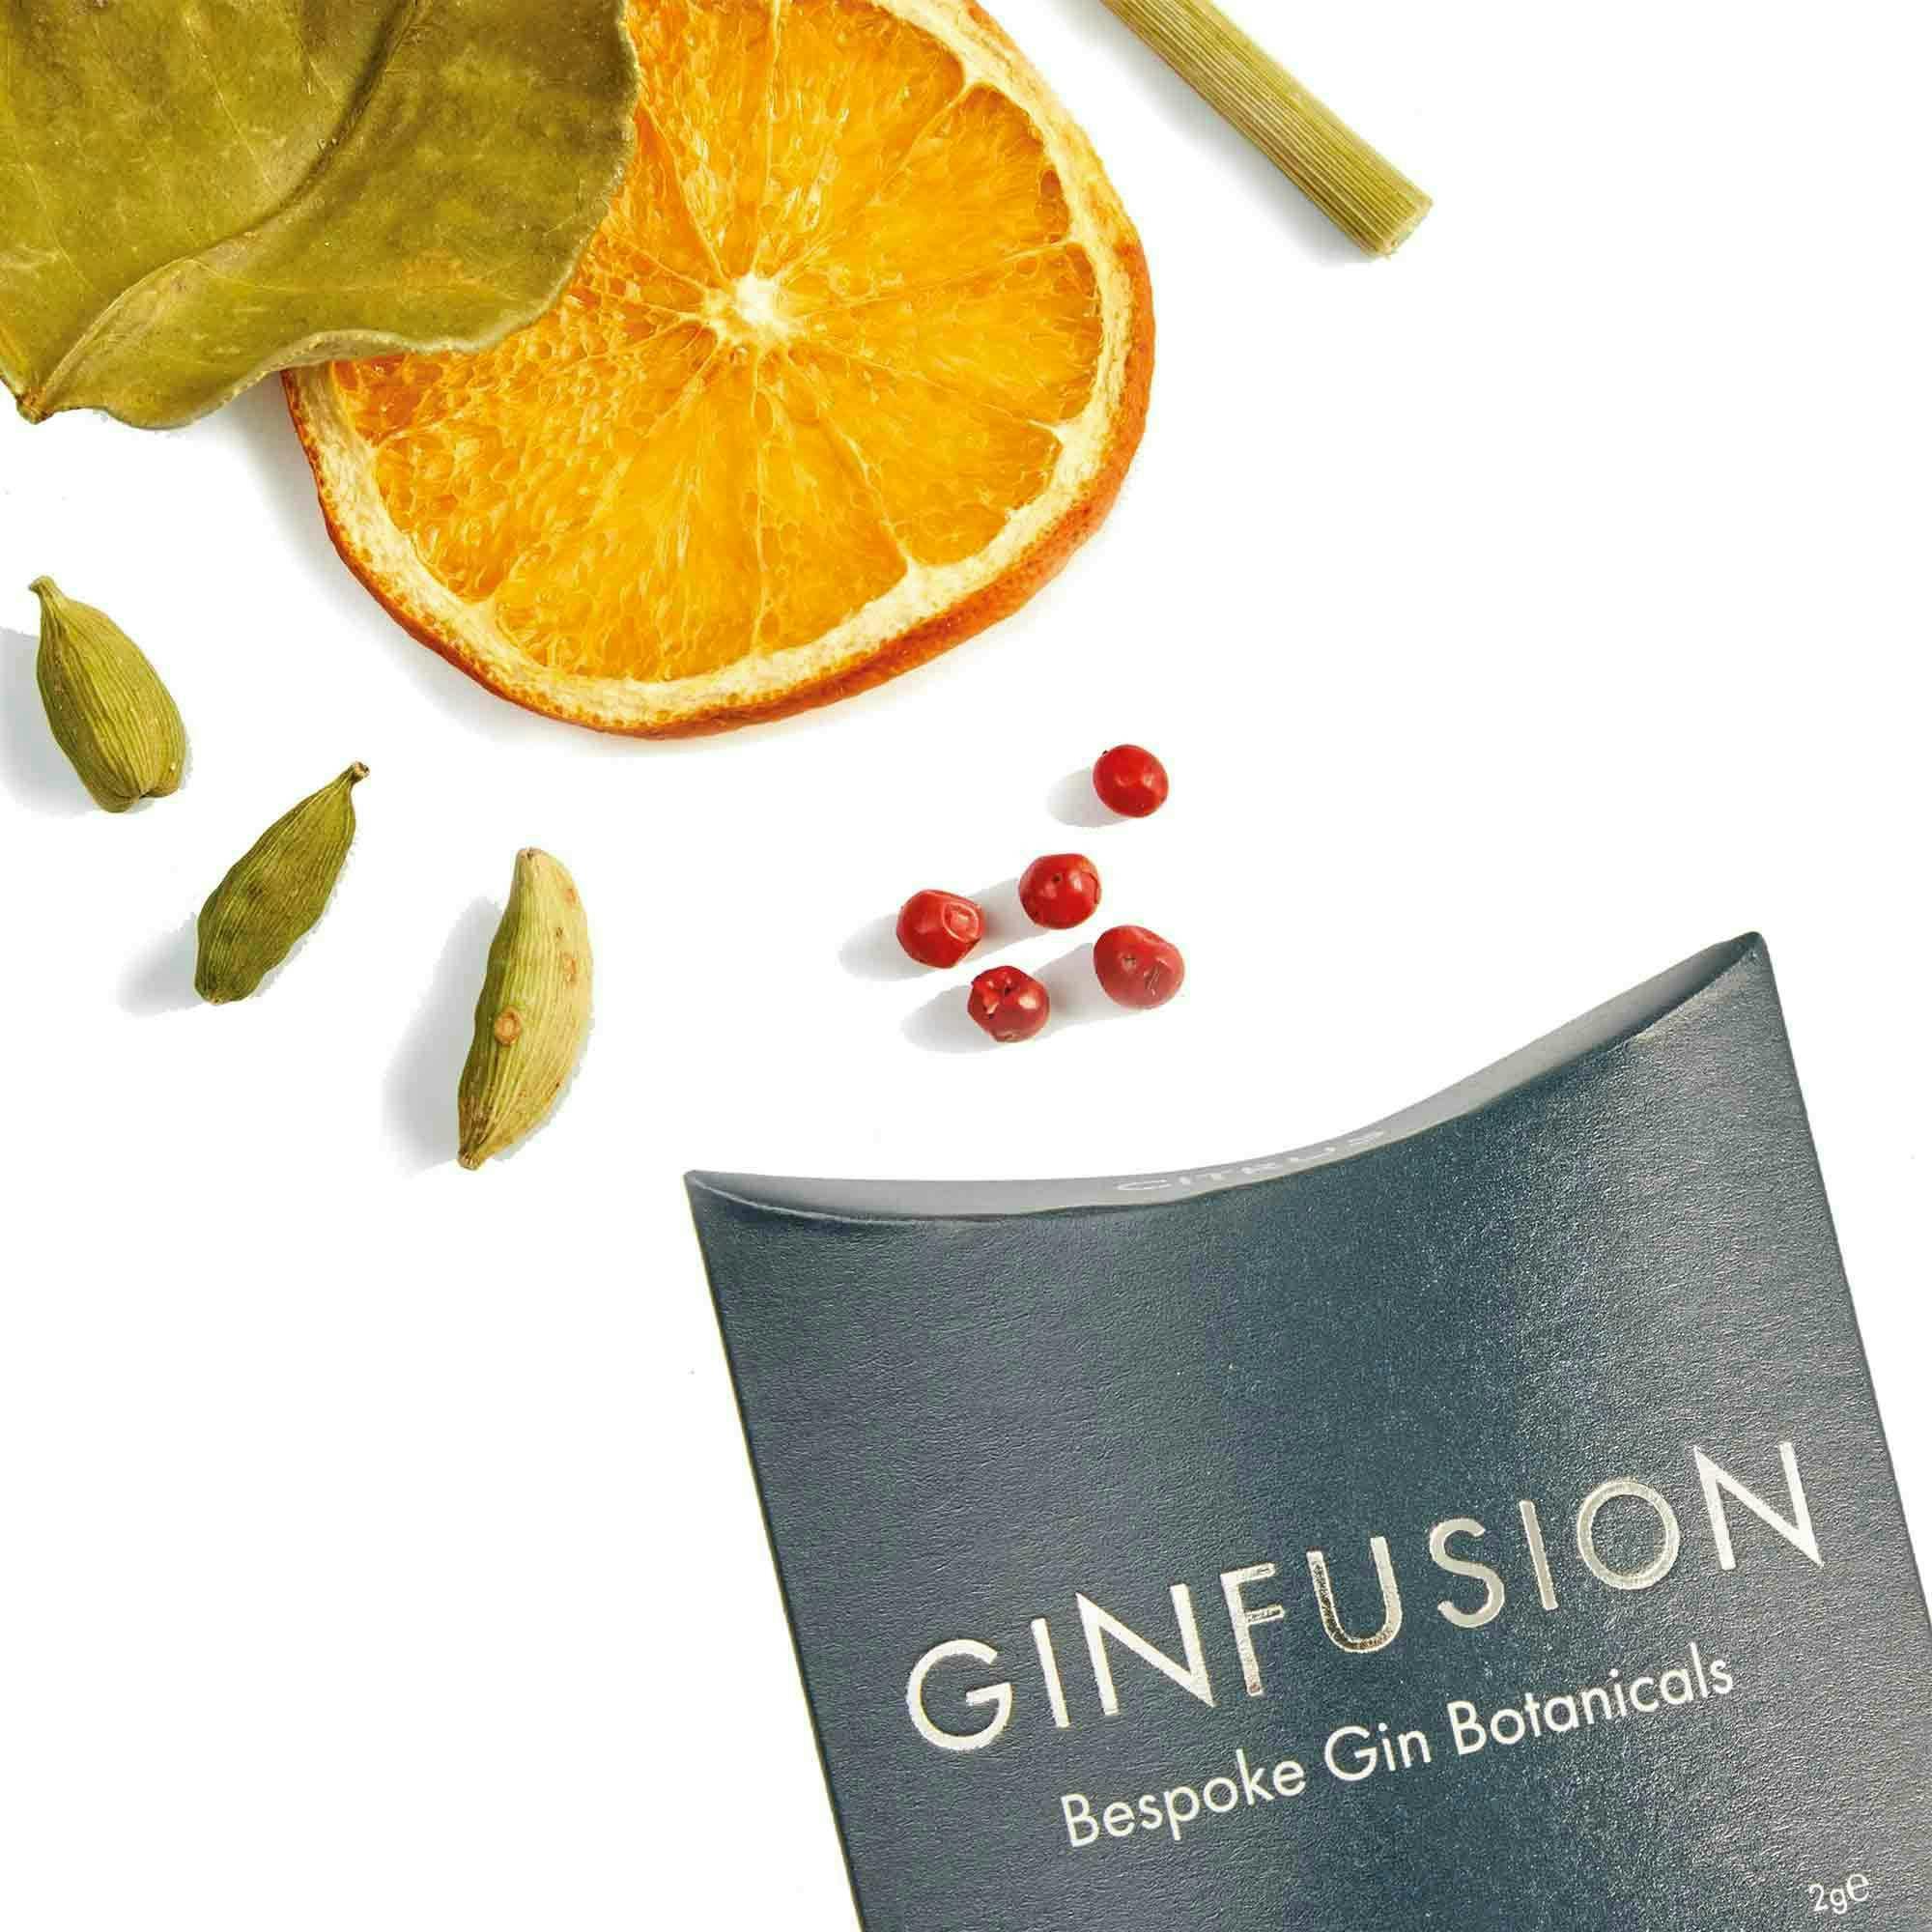 Ginfusion Taster Pack of 4